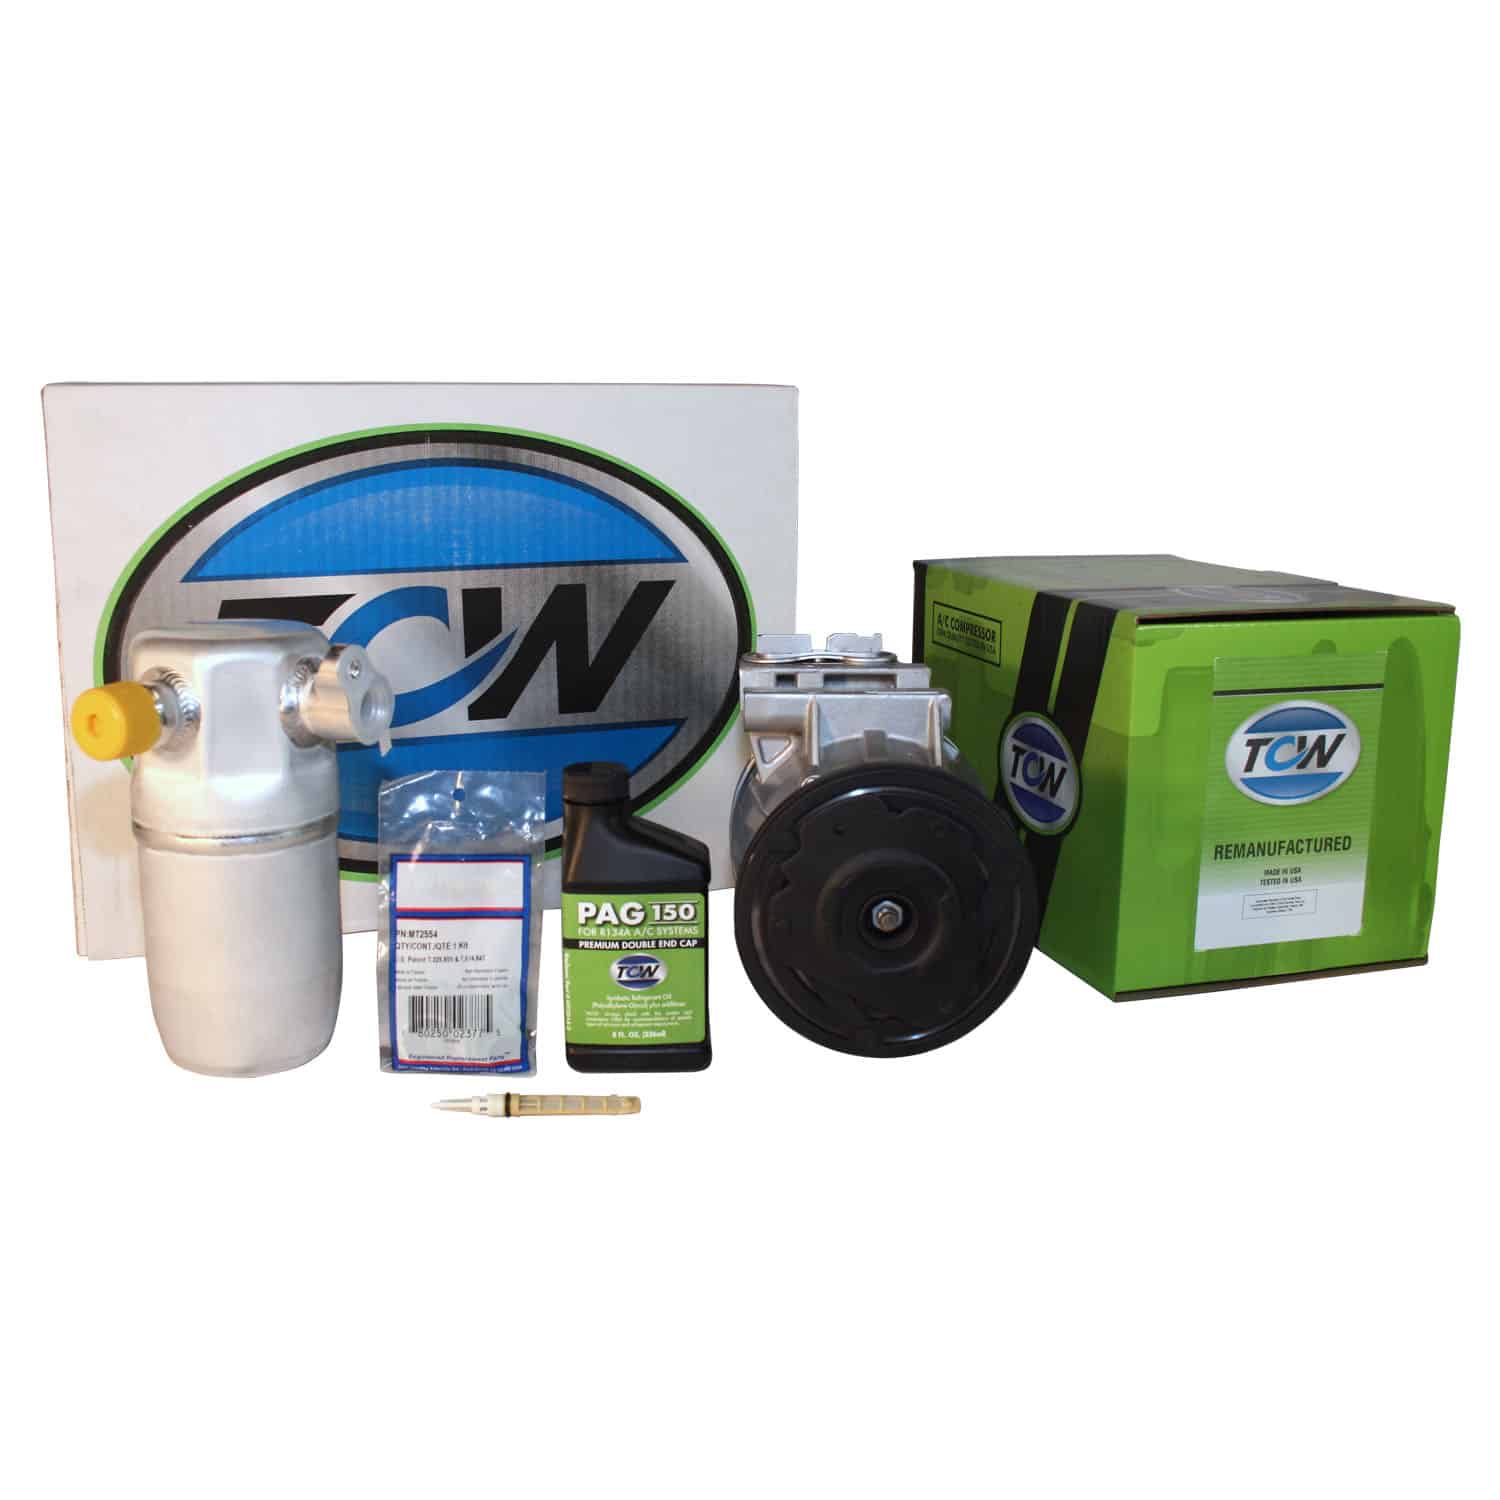 TCW Vehicle A/C Kit K1000362R Remanufactured Product Image field_60b6a13a6e67c